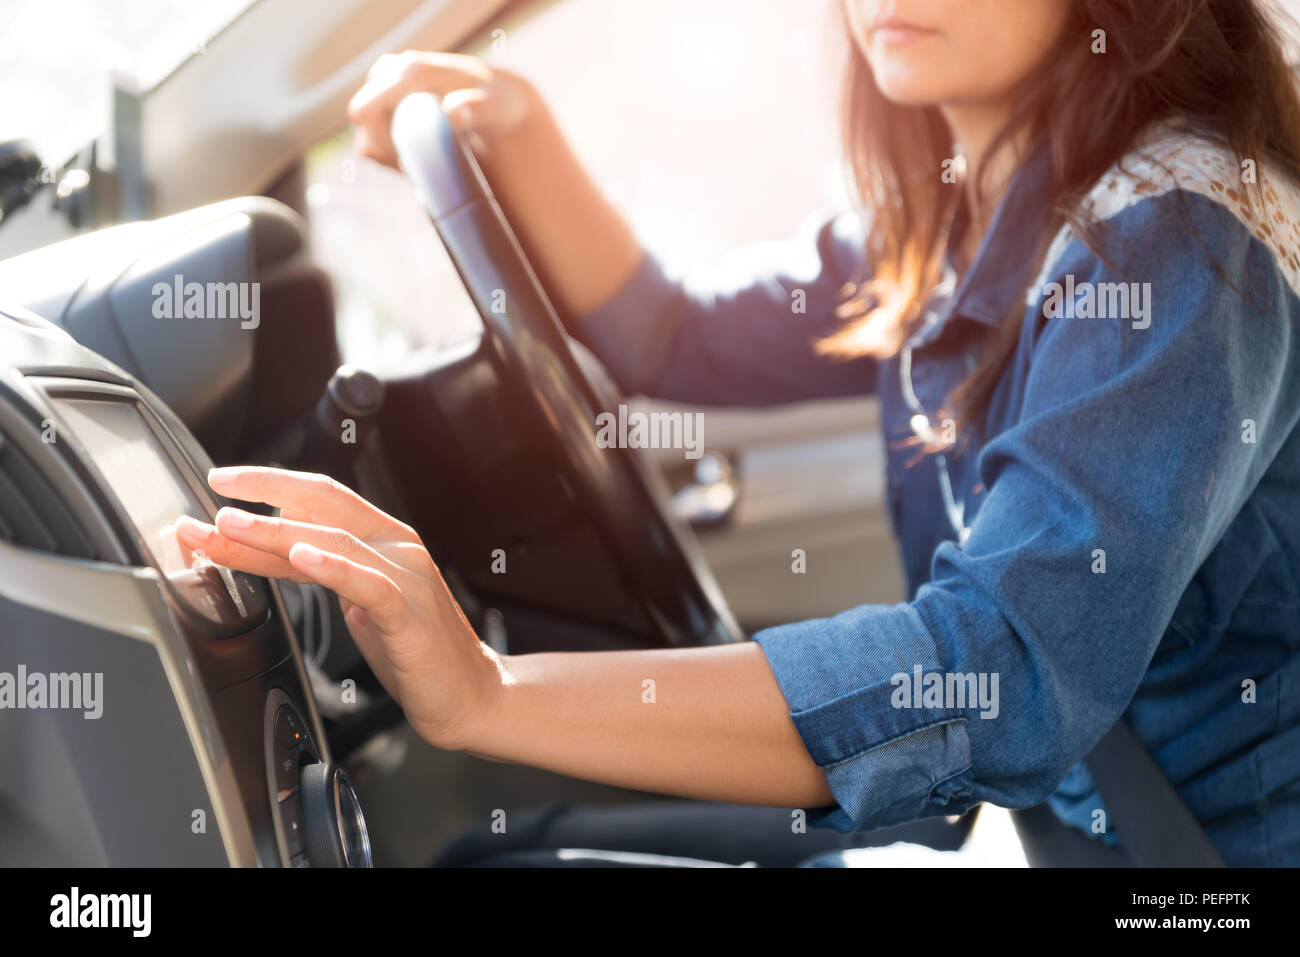 Woman Turning Button Of Radio In Car Stock Photo - Download Image